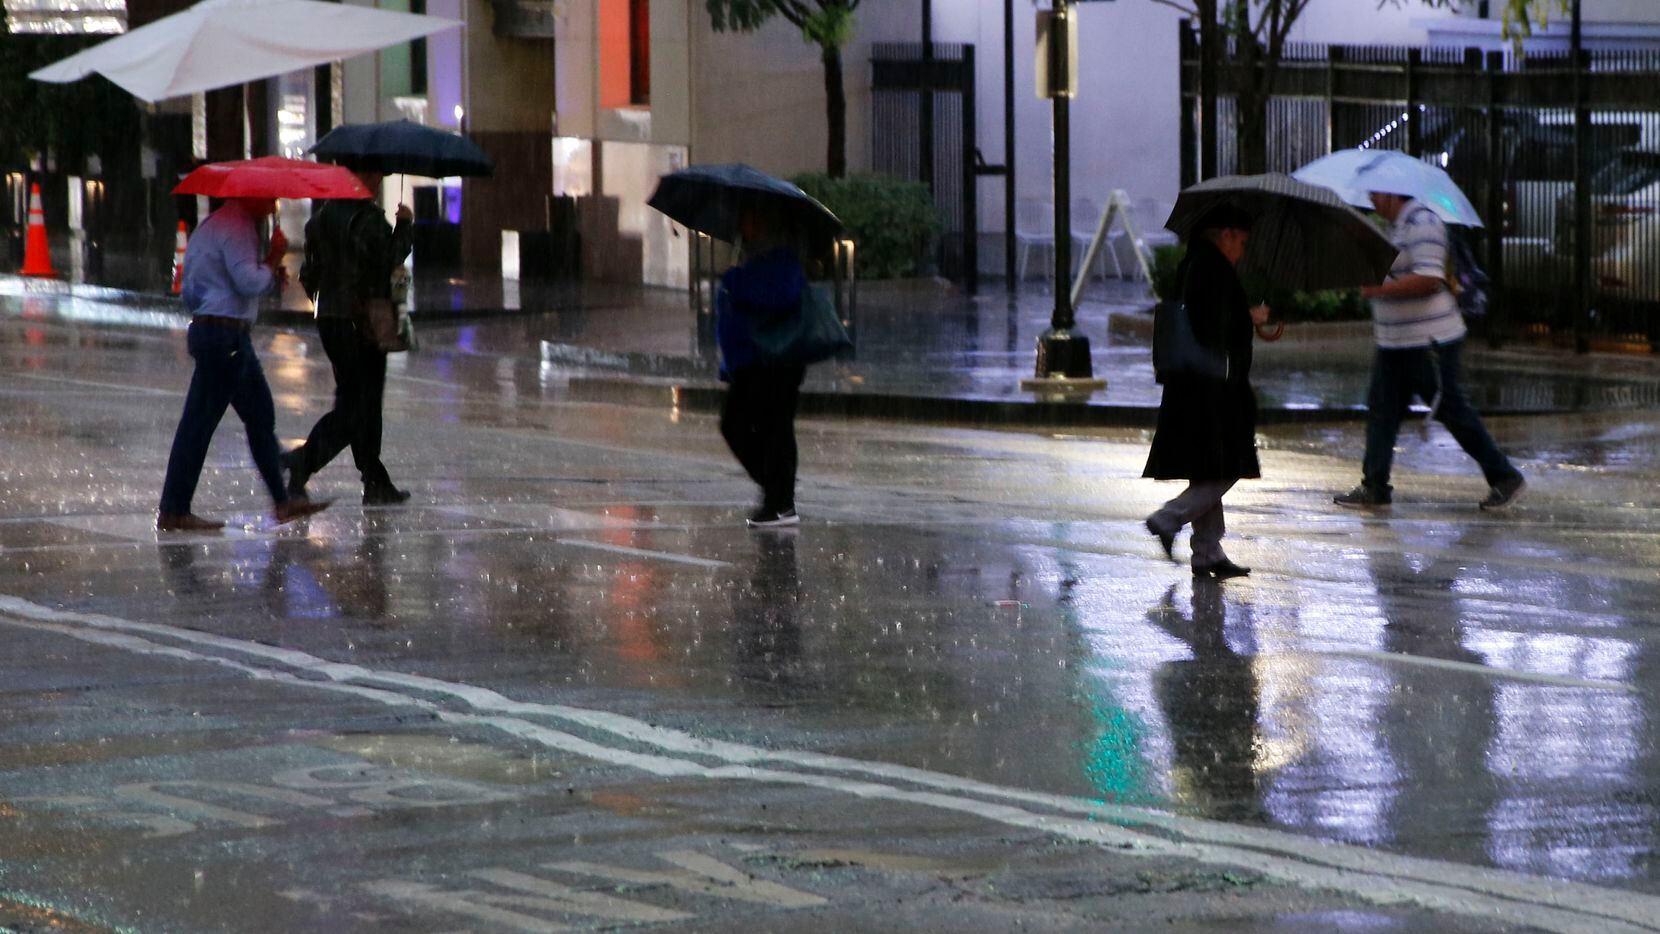 People make their way through wet and cold conditions as temperatures dropped into the 40's...